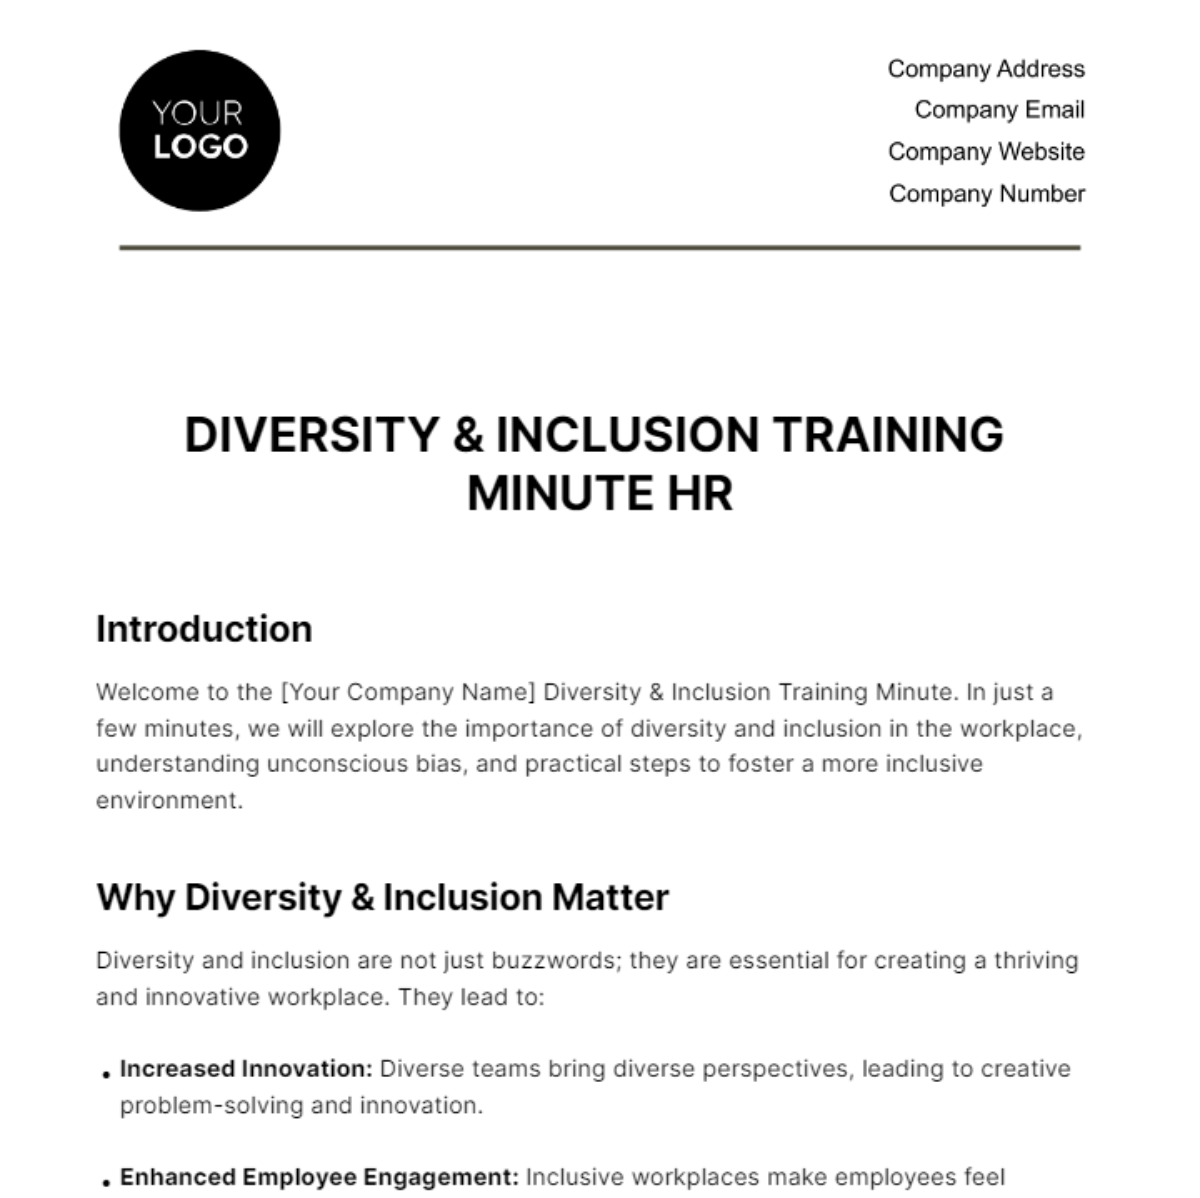 Free Diversity & Inclusion Training Minute HR Template